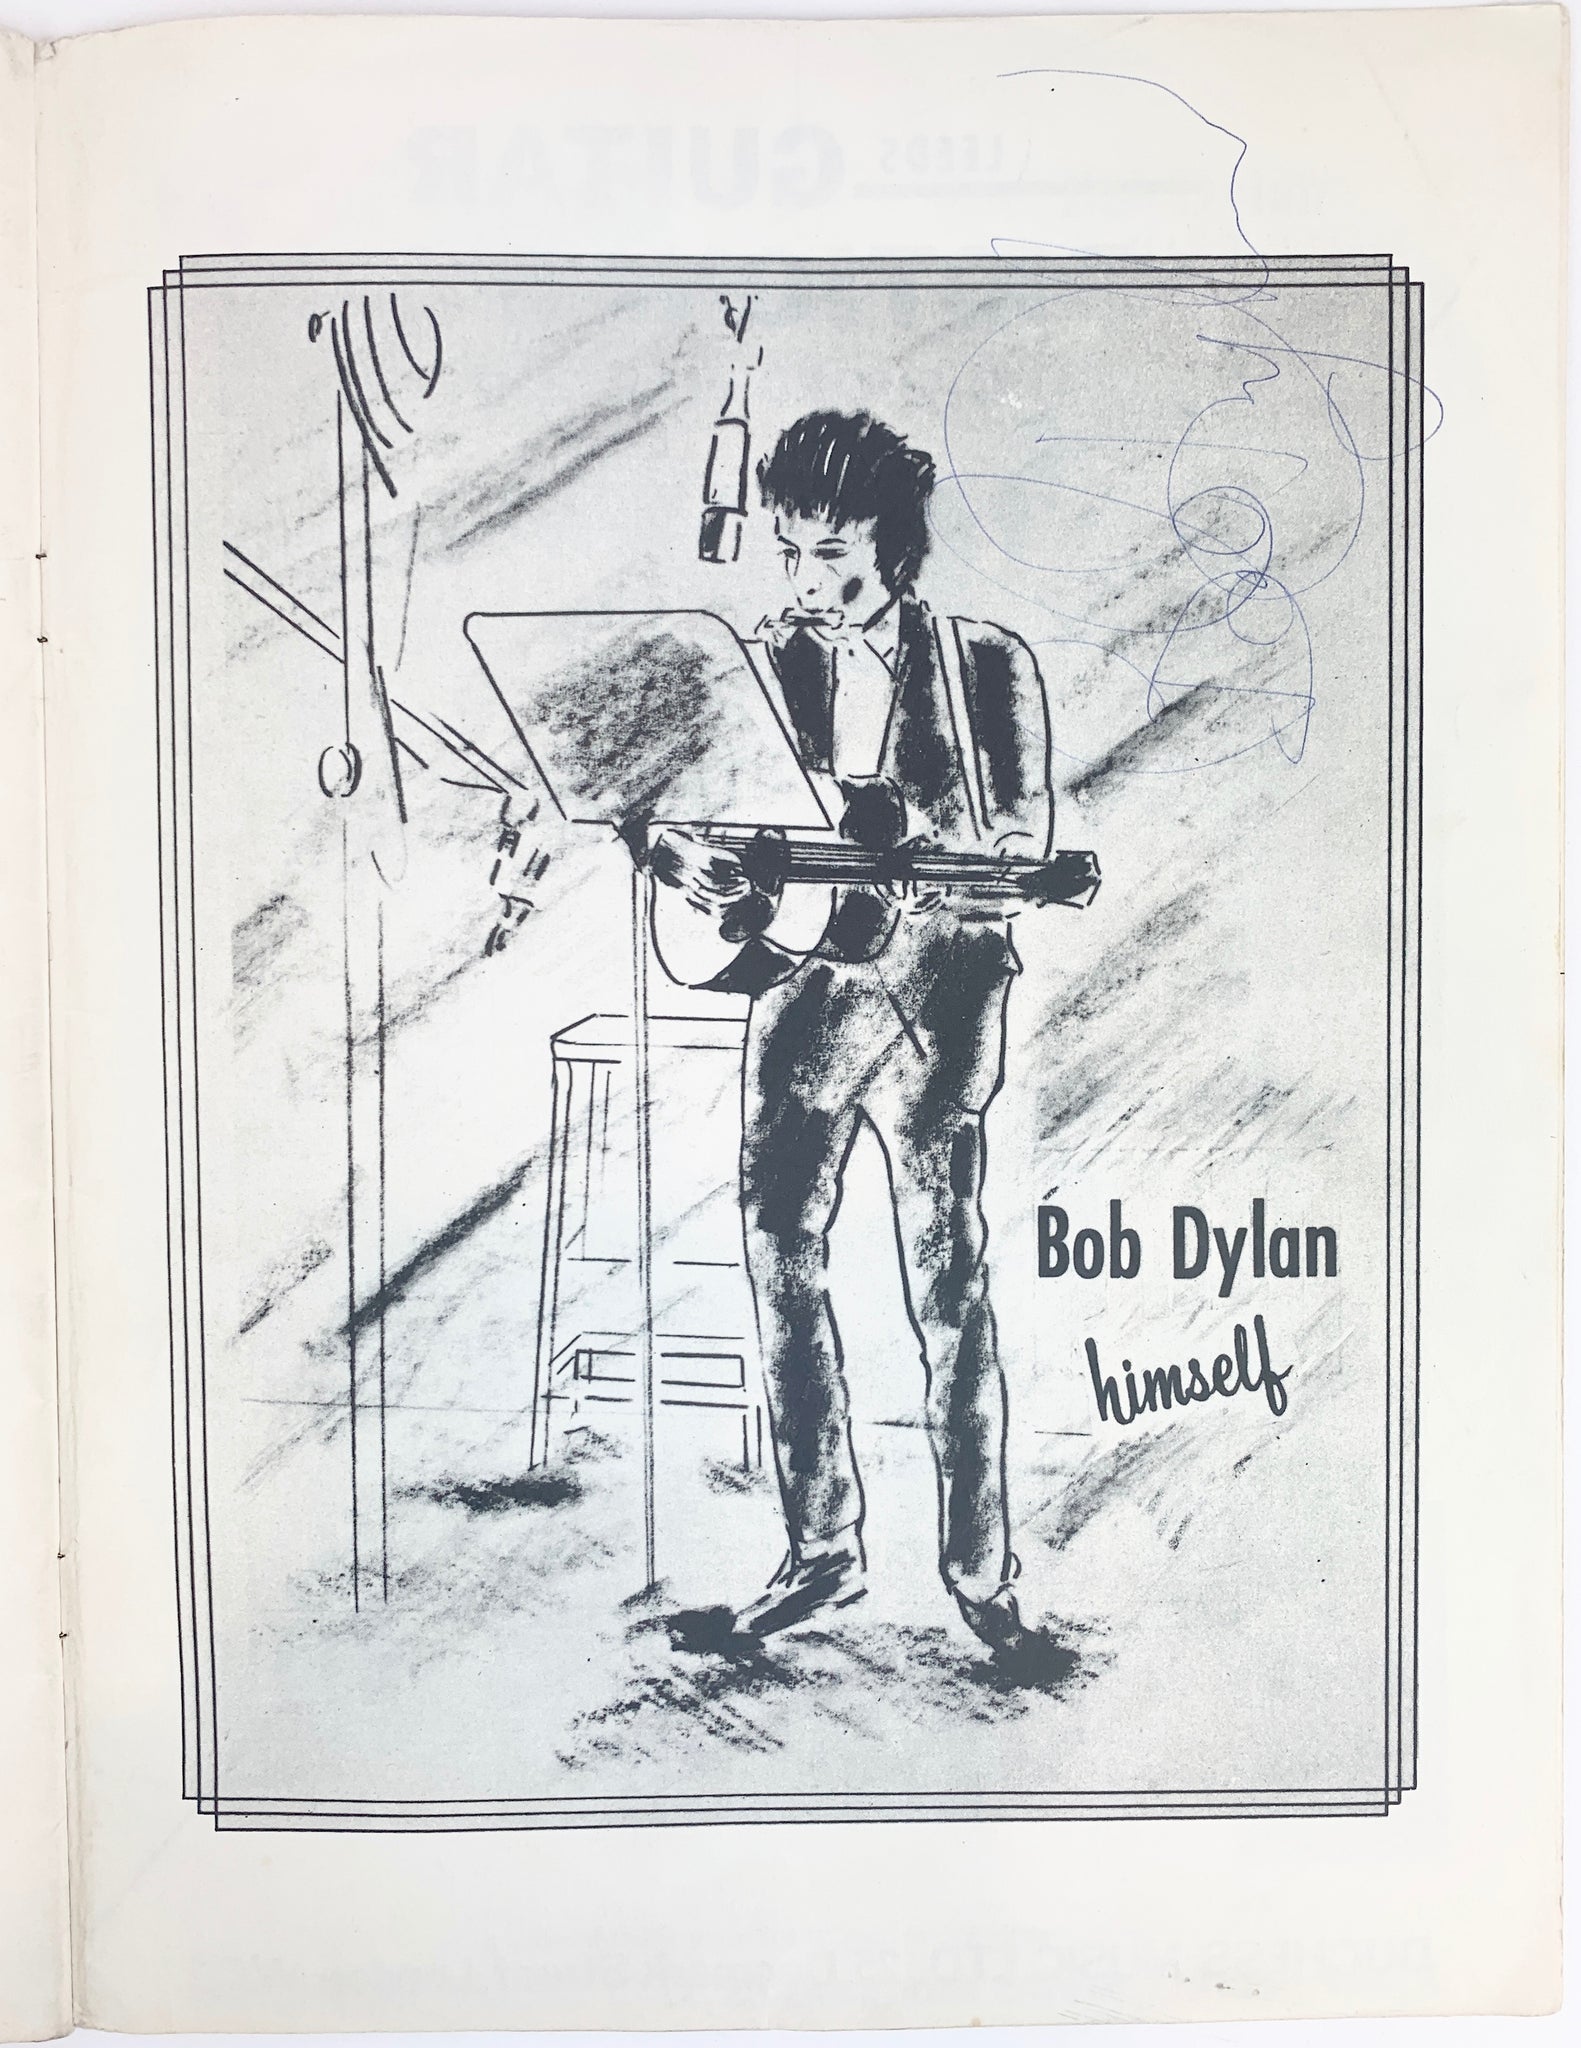 Dylan, Bob. (b. 1941): "Bob Dylan Himself: His Words, His Music" - Signed Songbook